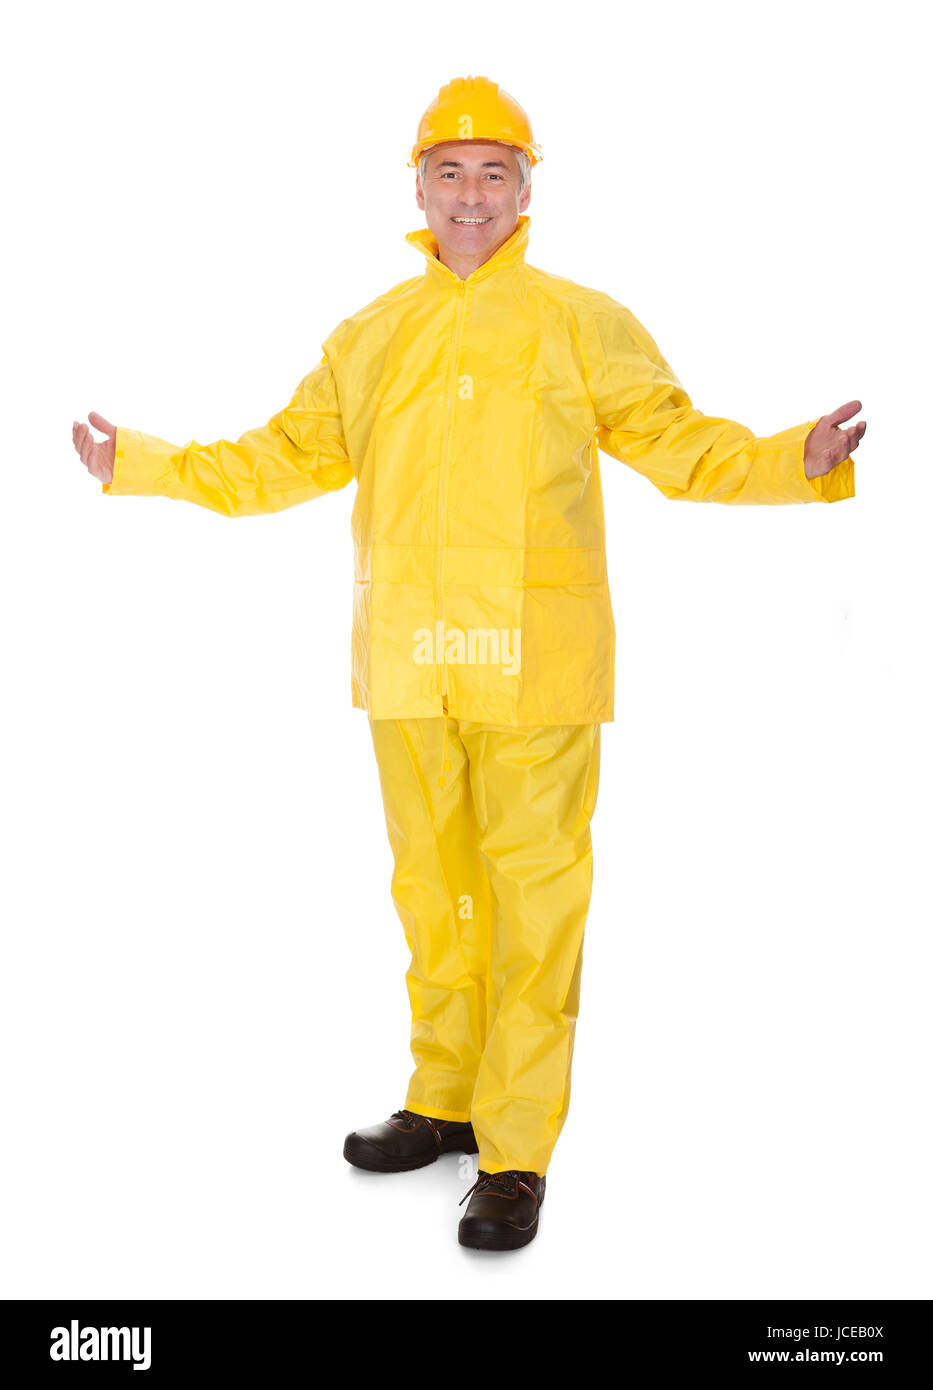 Man Wearing Raincoat High Resolution Stock Photography and Images - Alamy